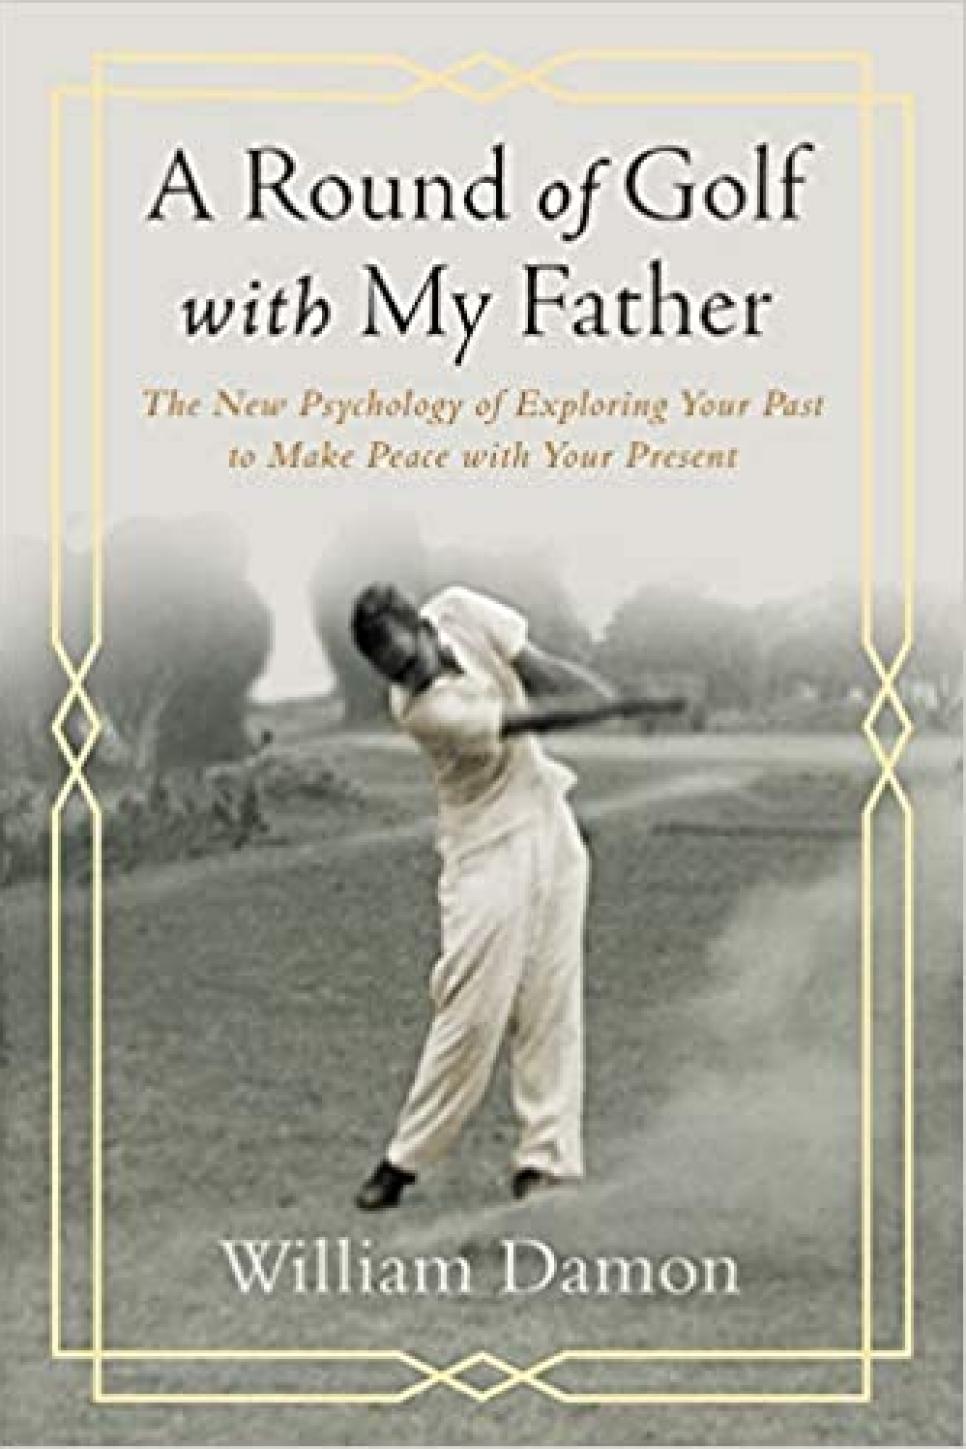 rx-amazona-round-of-golf-with-my-father-the-new-psychology-of-exploring-your-past-to-make-peace-with-your-present-hardcover.jpeg